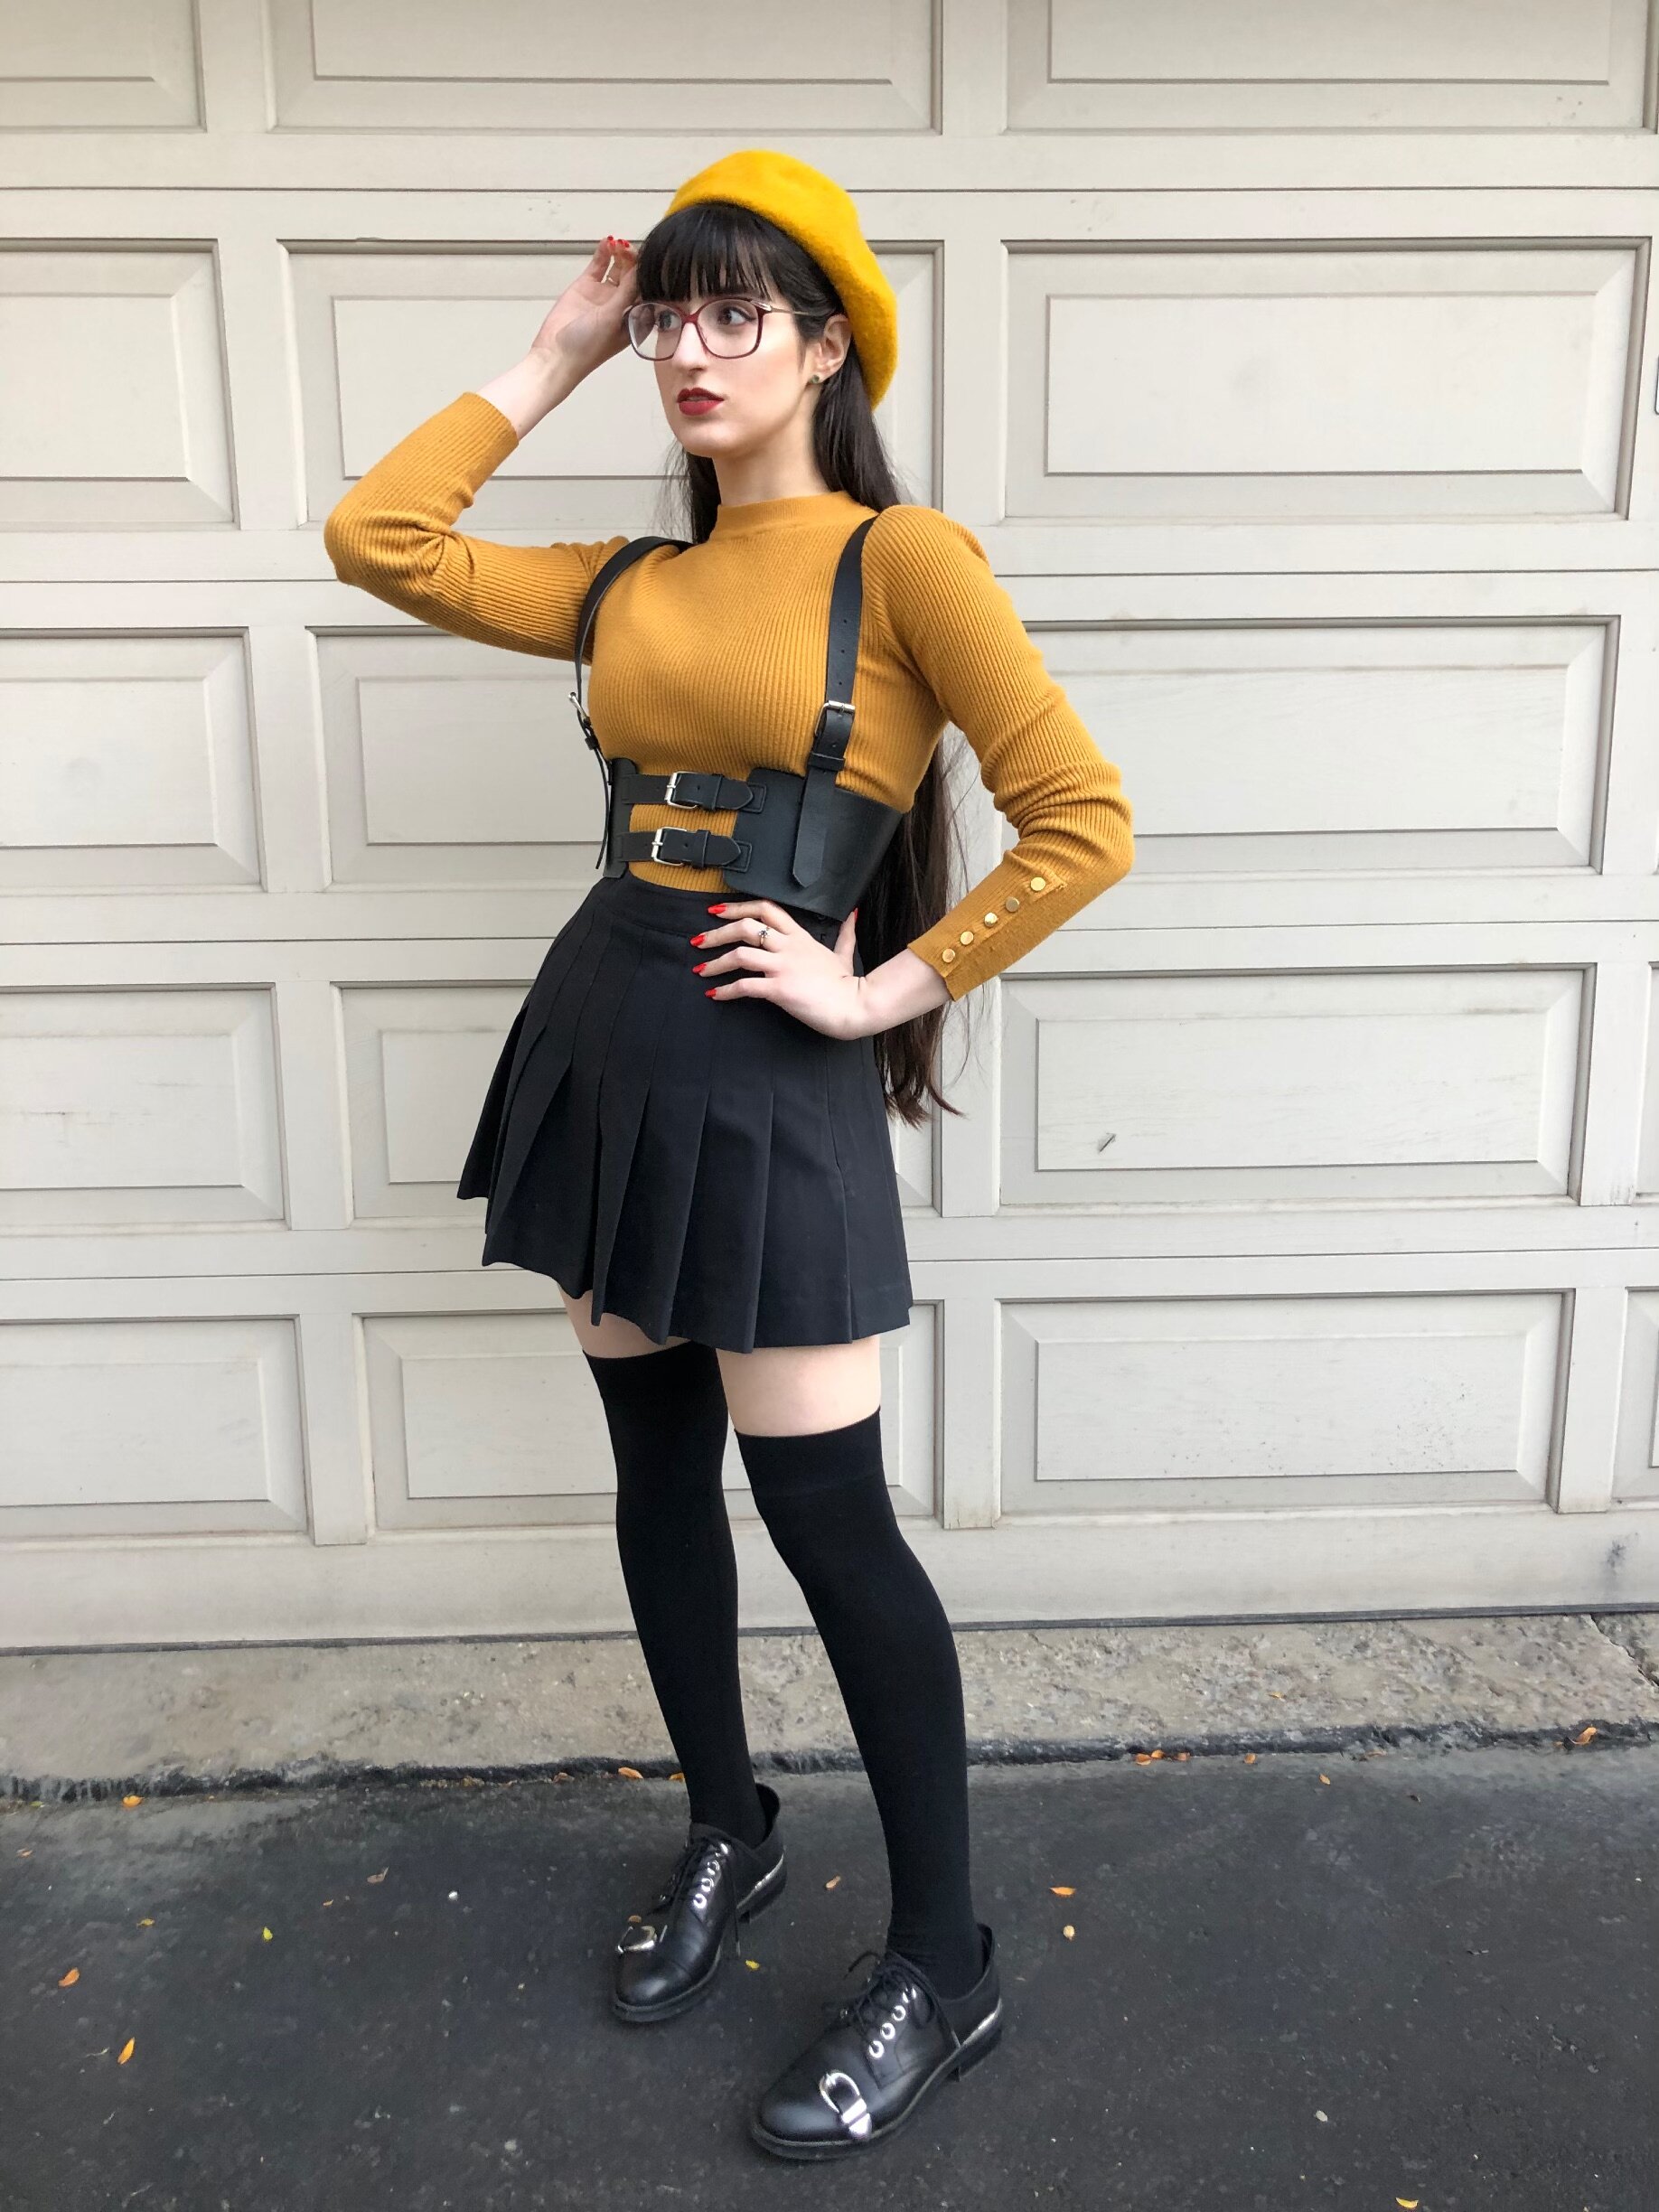 ayasha siddika recommends Skirt With Thigh Highs